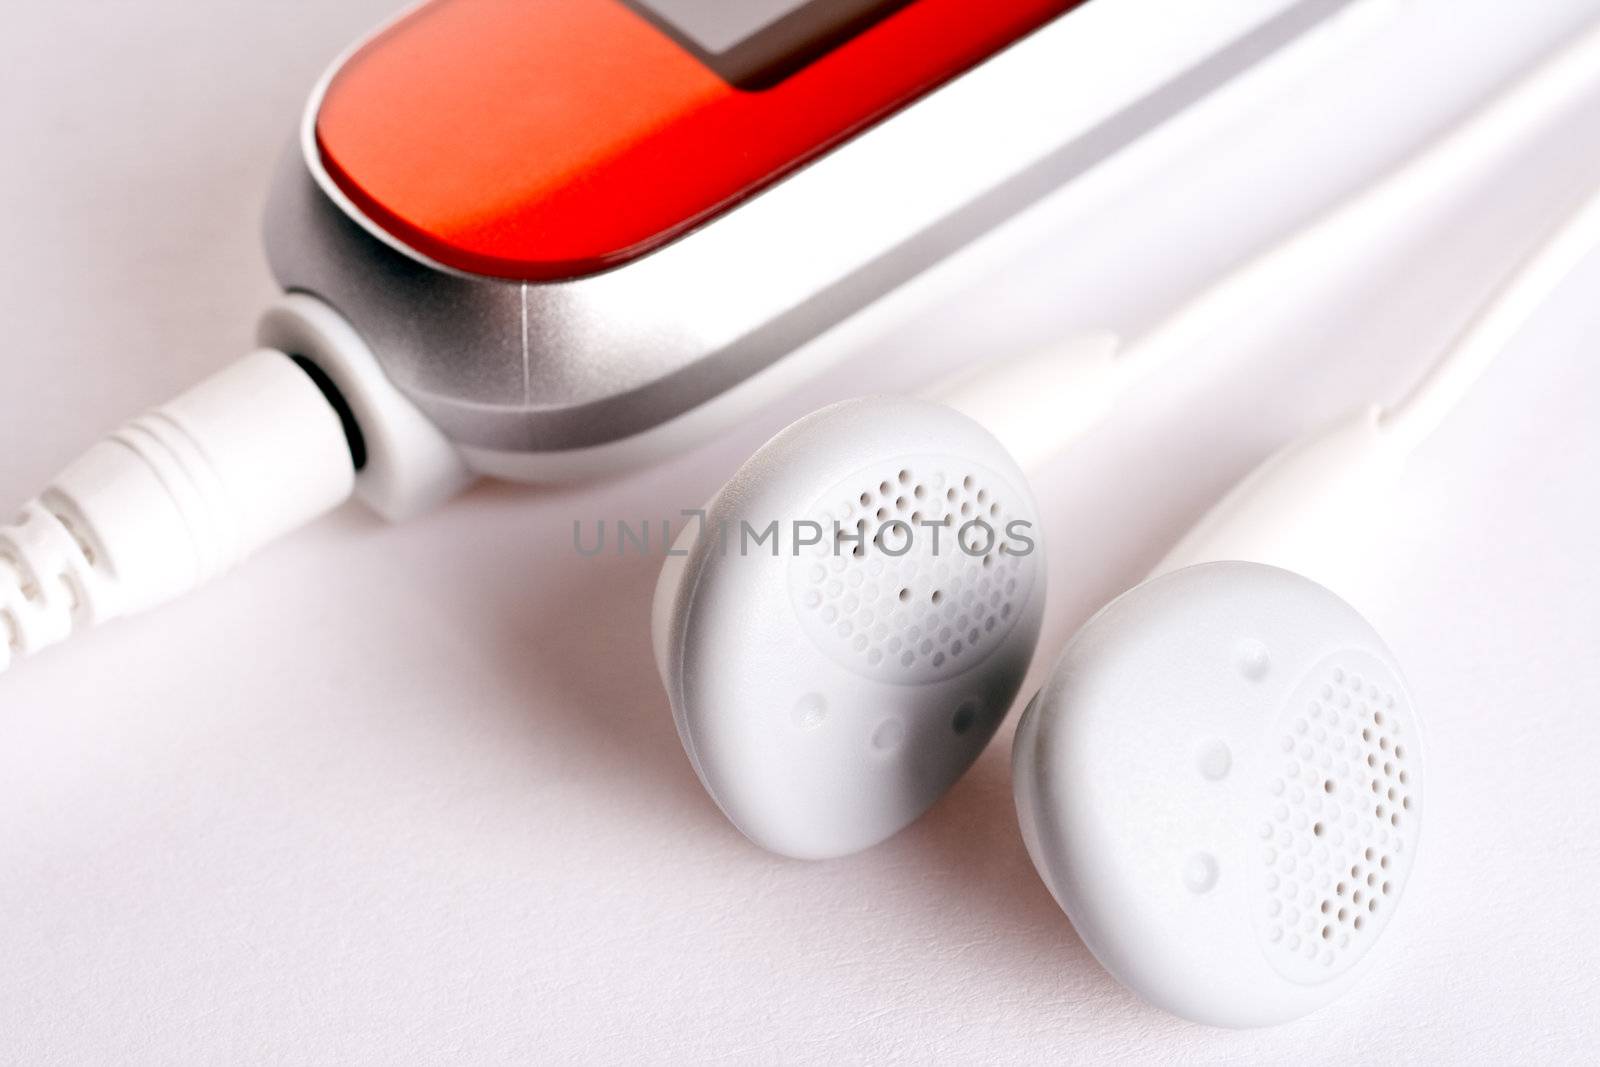 mp3 player with headphoneson on a white background